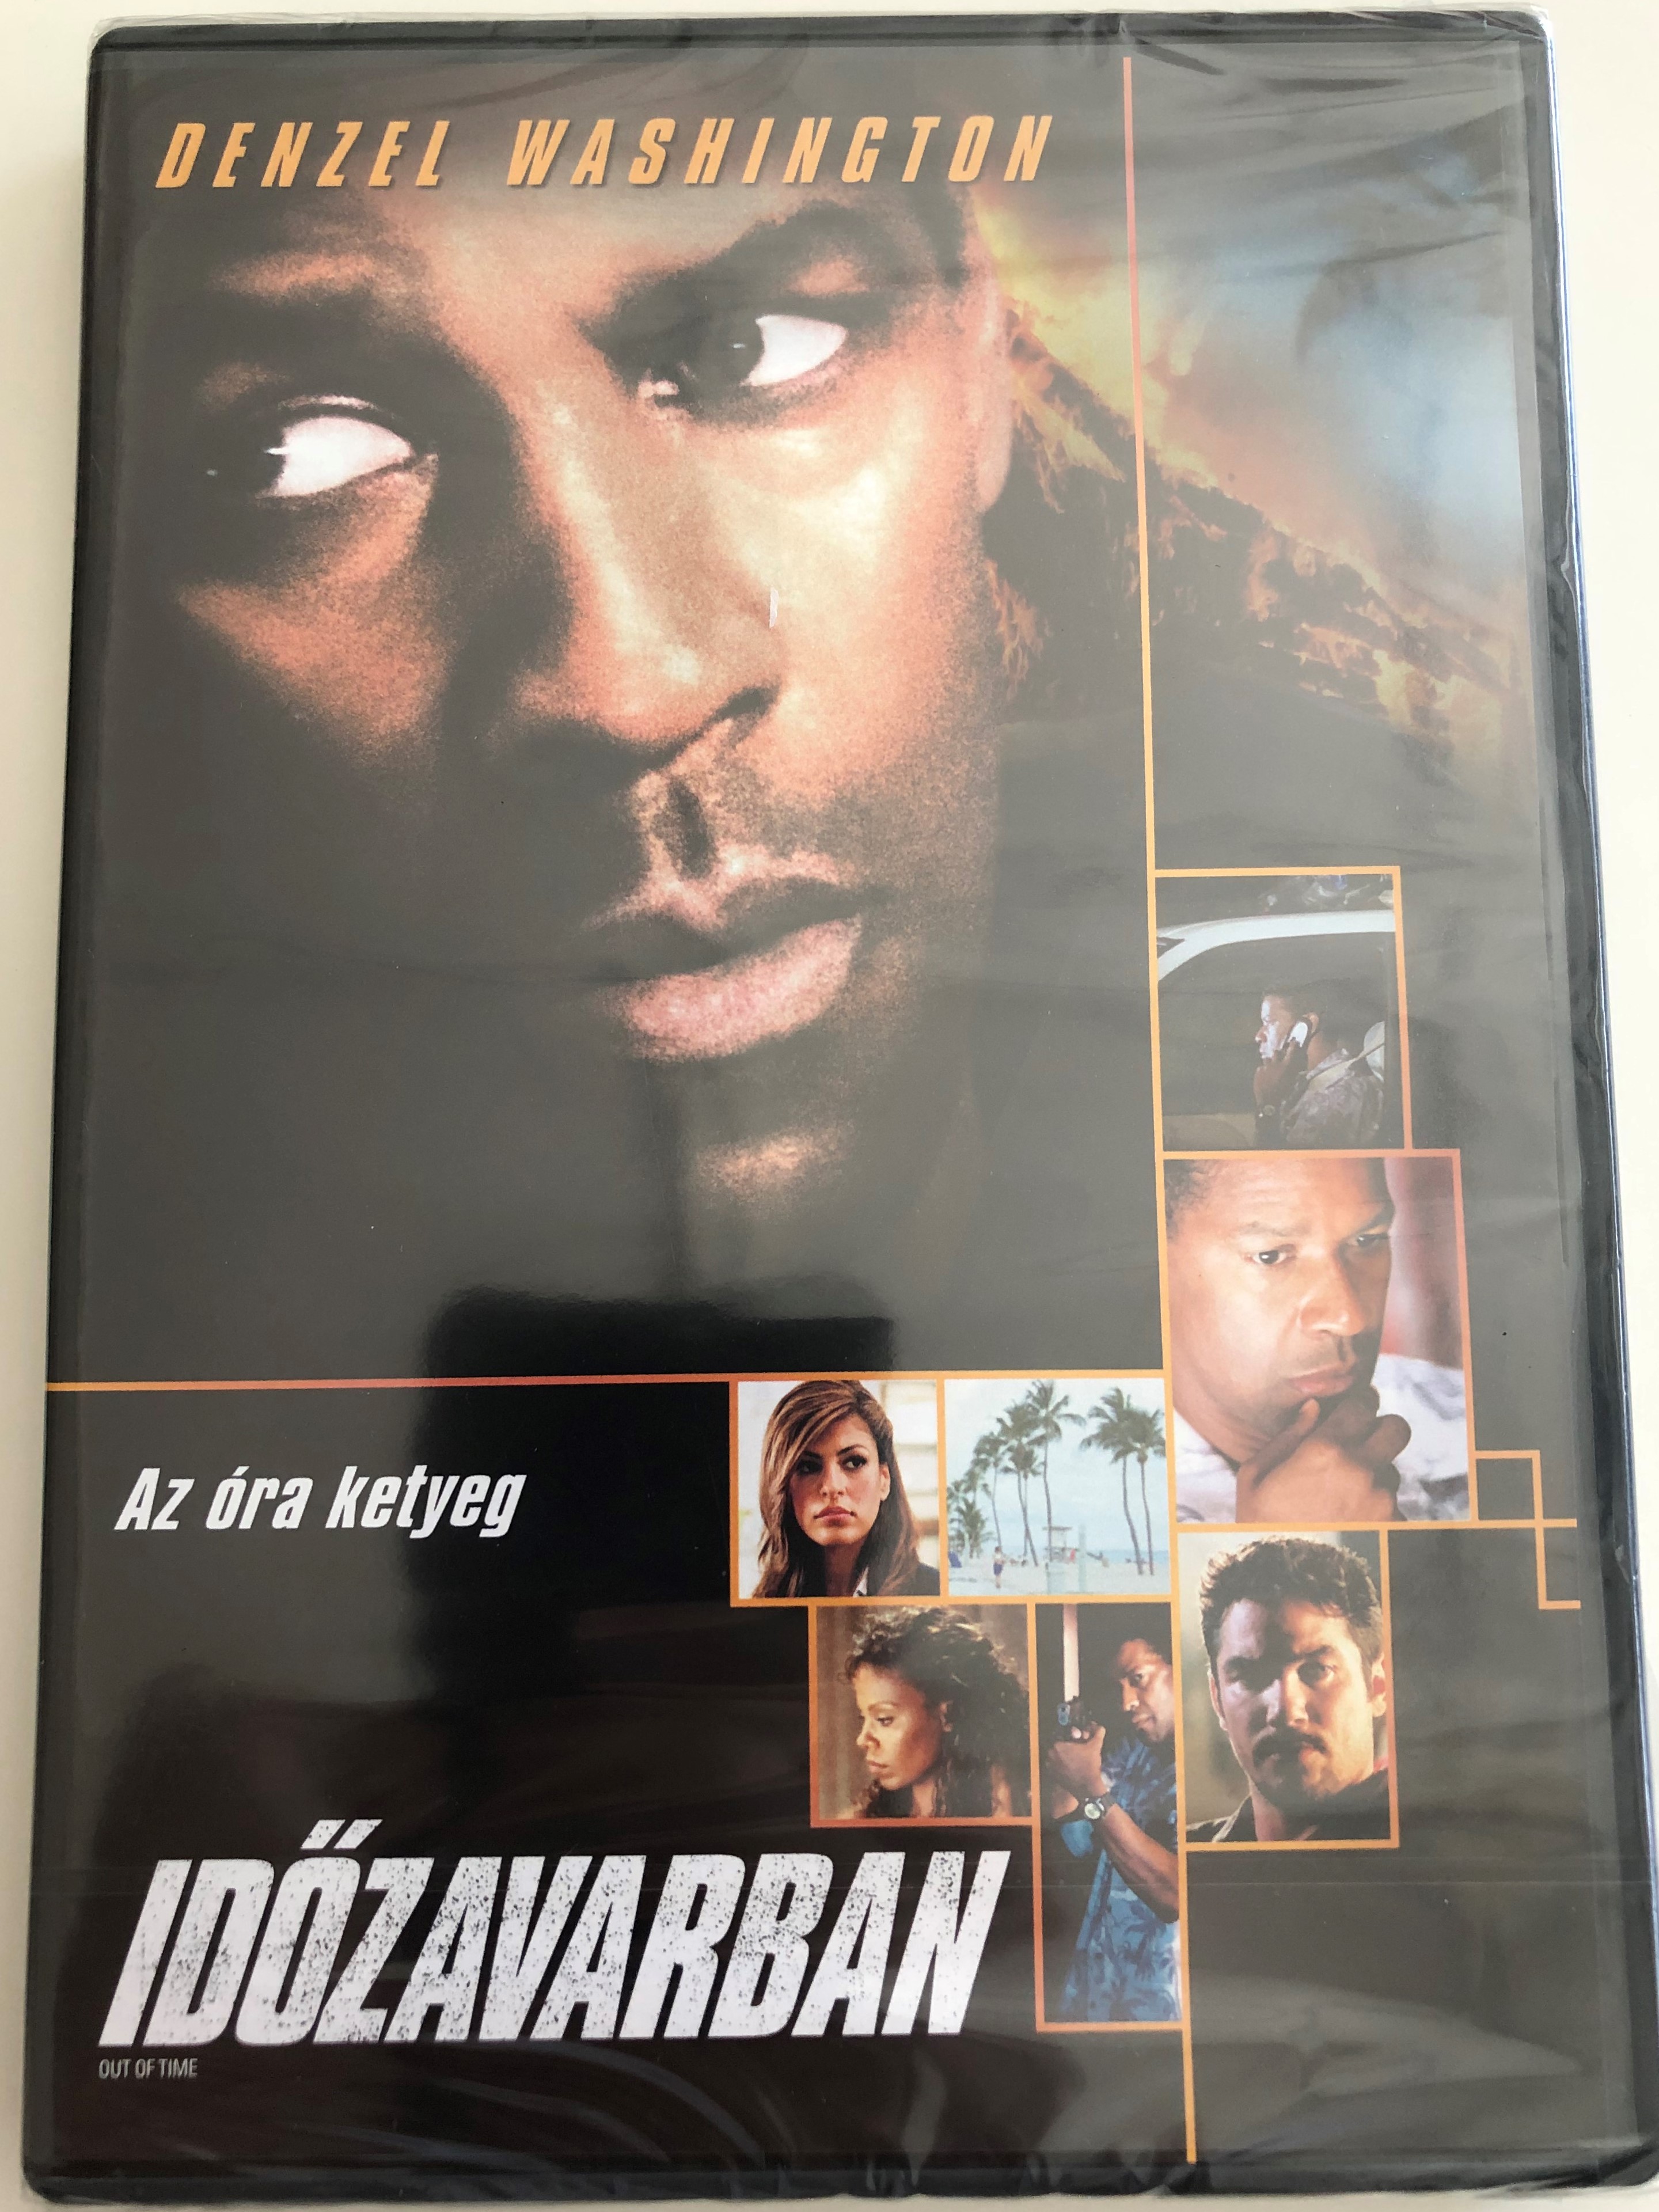 out-of-time-dvd-2003-id-zavarban-directed-by-carl-franklin-starring-denzel-washington-eva-mendes-sanaa-lathan-dean-cain-1-.jpg